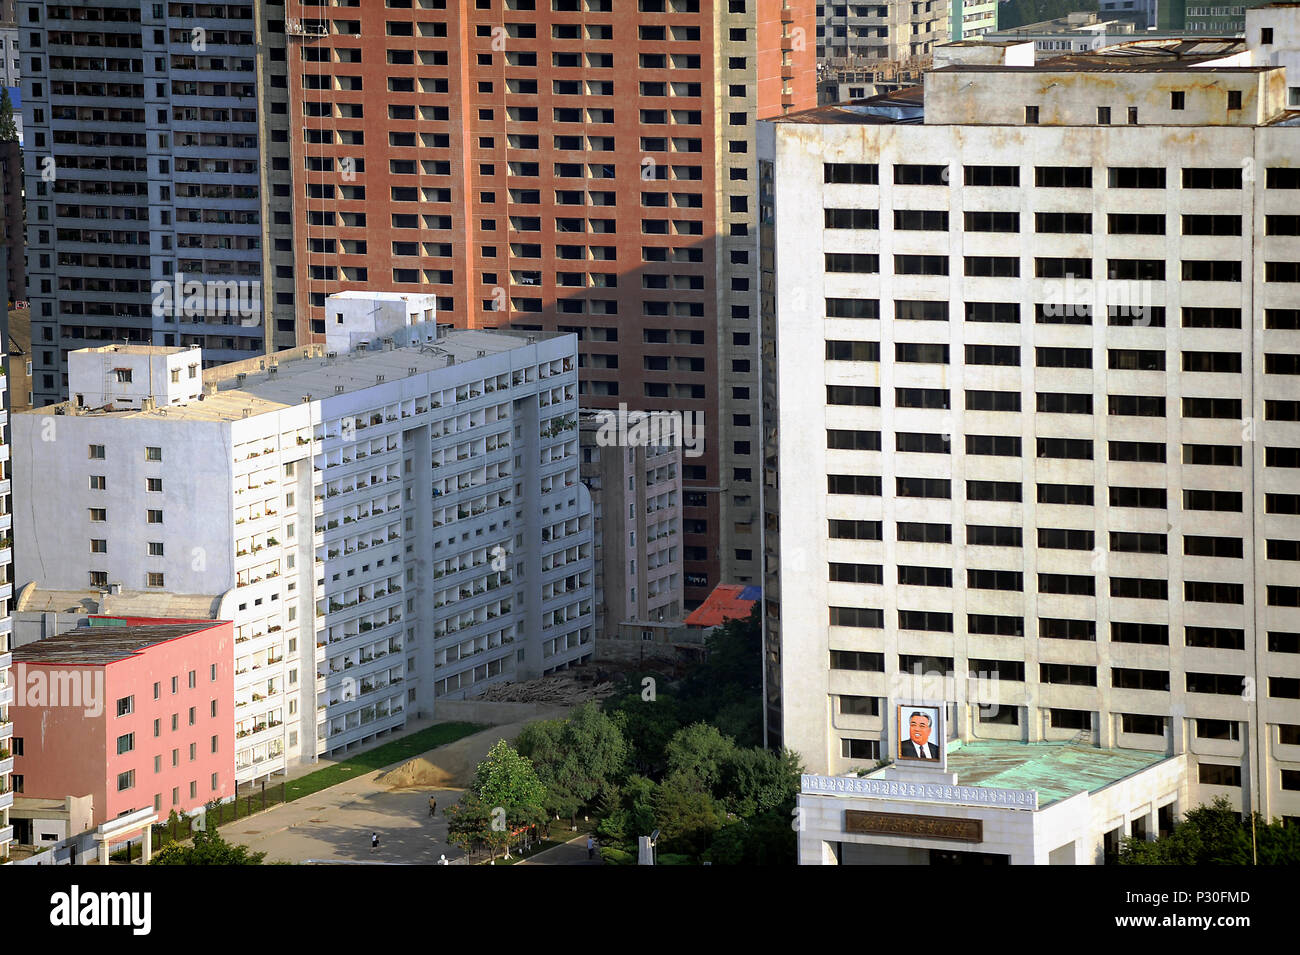 Pyongyang, North Korea, view of high-rise buildings in the center Stock Photo